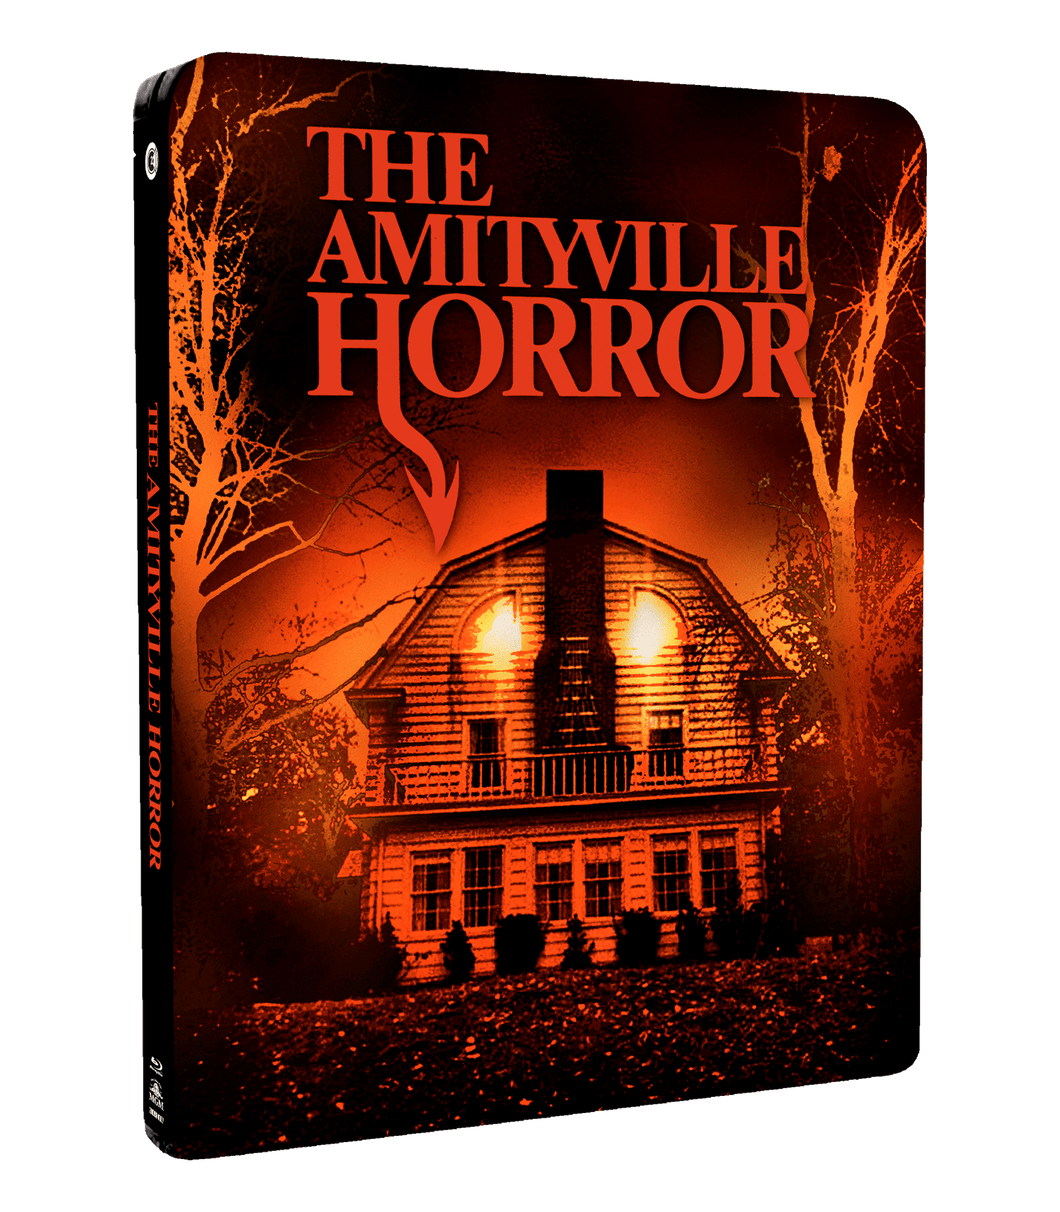 The Amityville Horror Steelbook Limited Edition - OUT OF PRINT